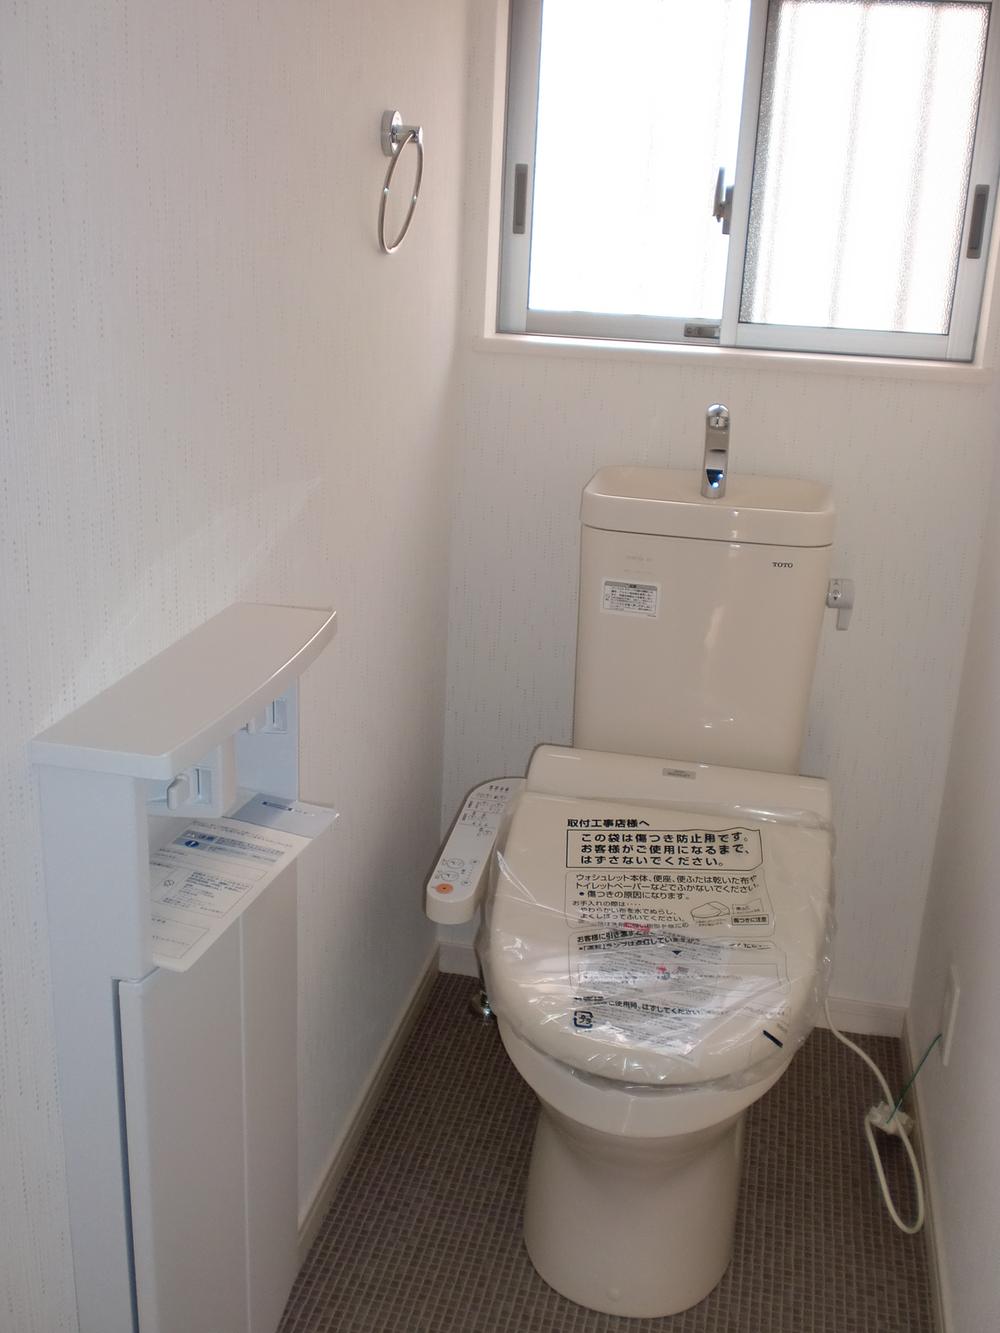 Toilet. (Same specifications photo)